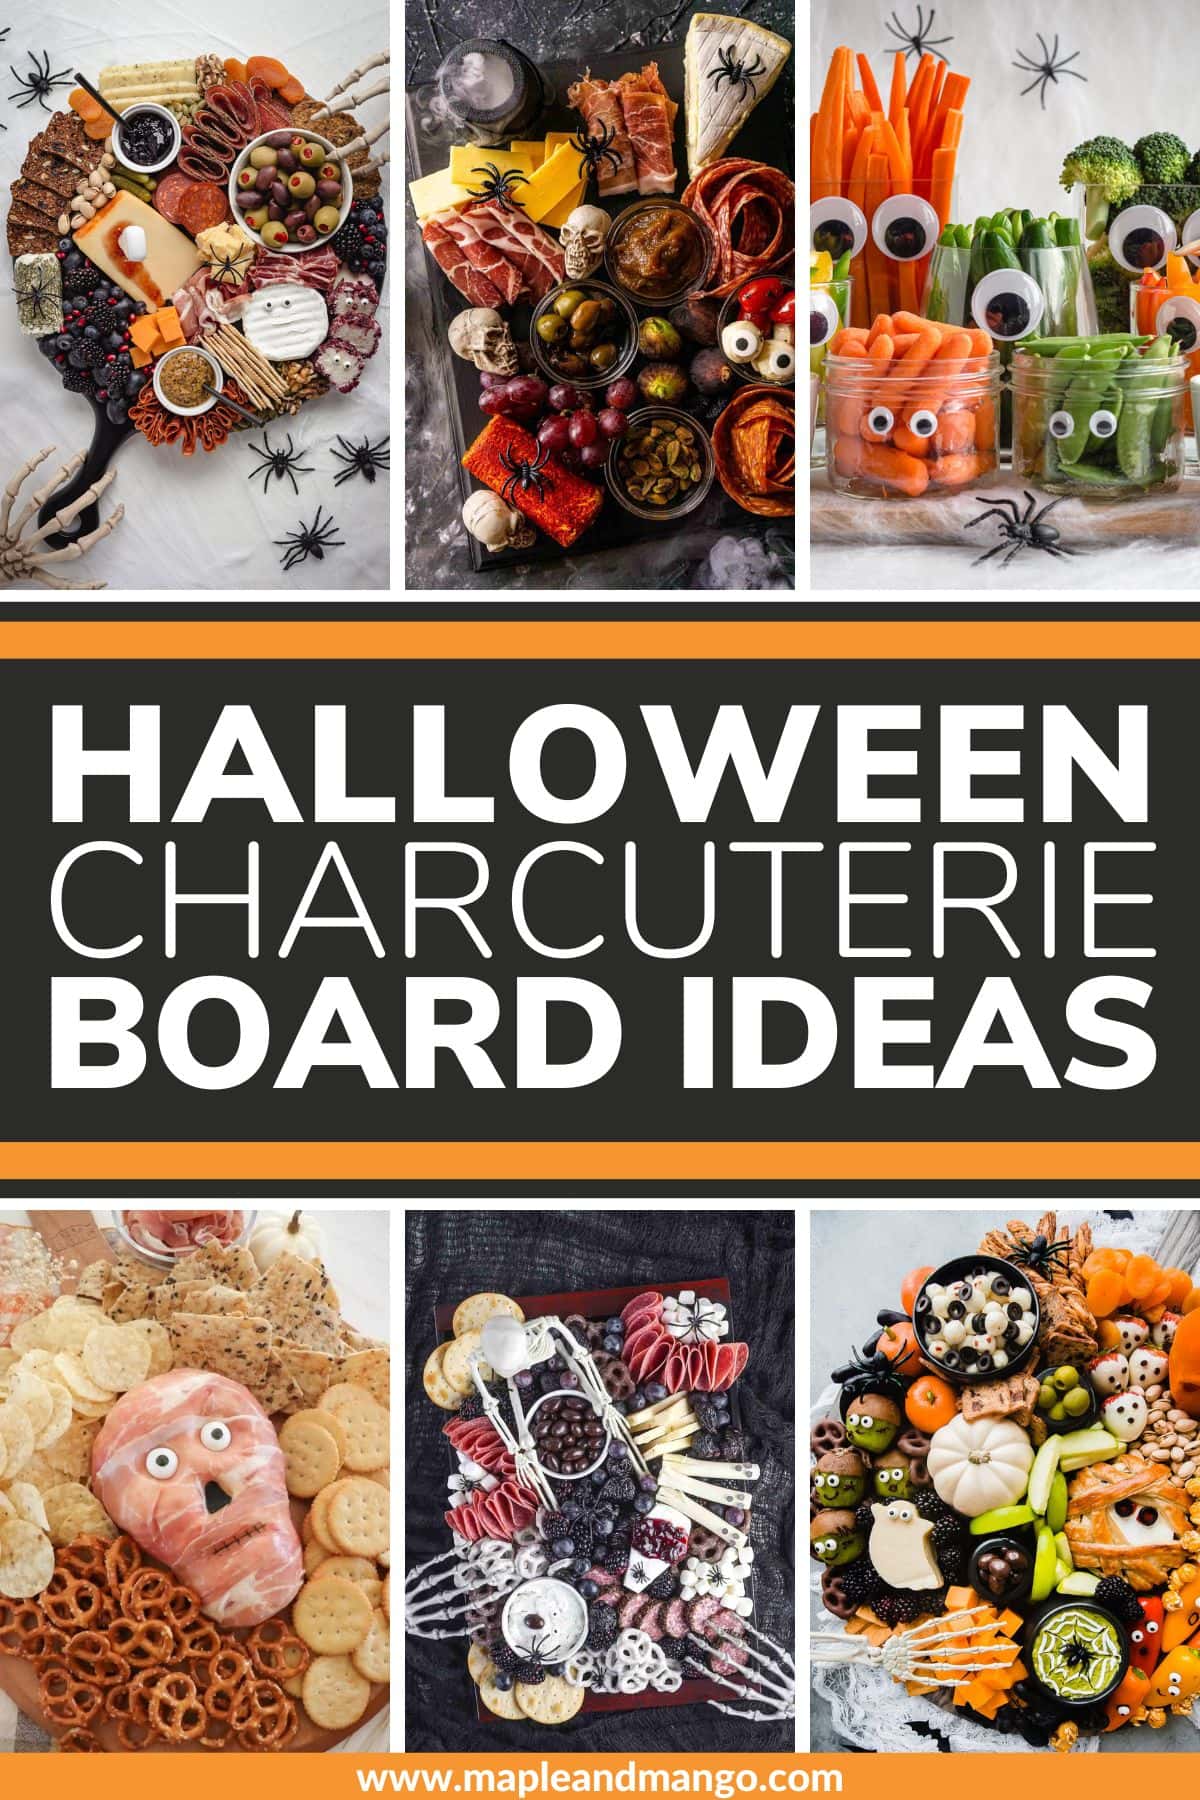 Pinterest collage graphic for Halloween Charcuterie Board Ideas.